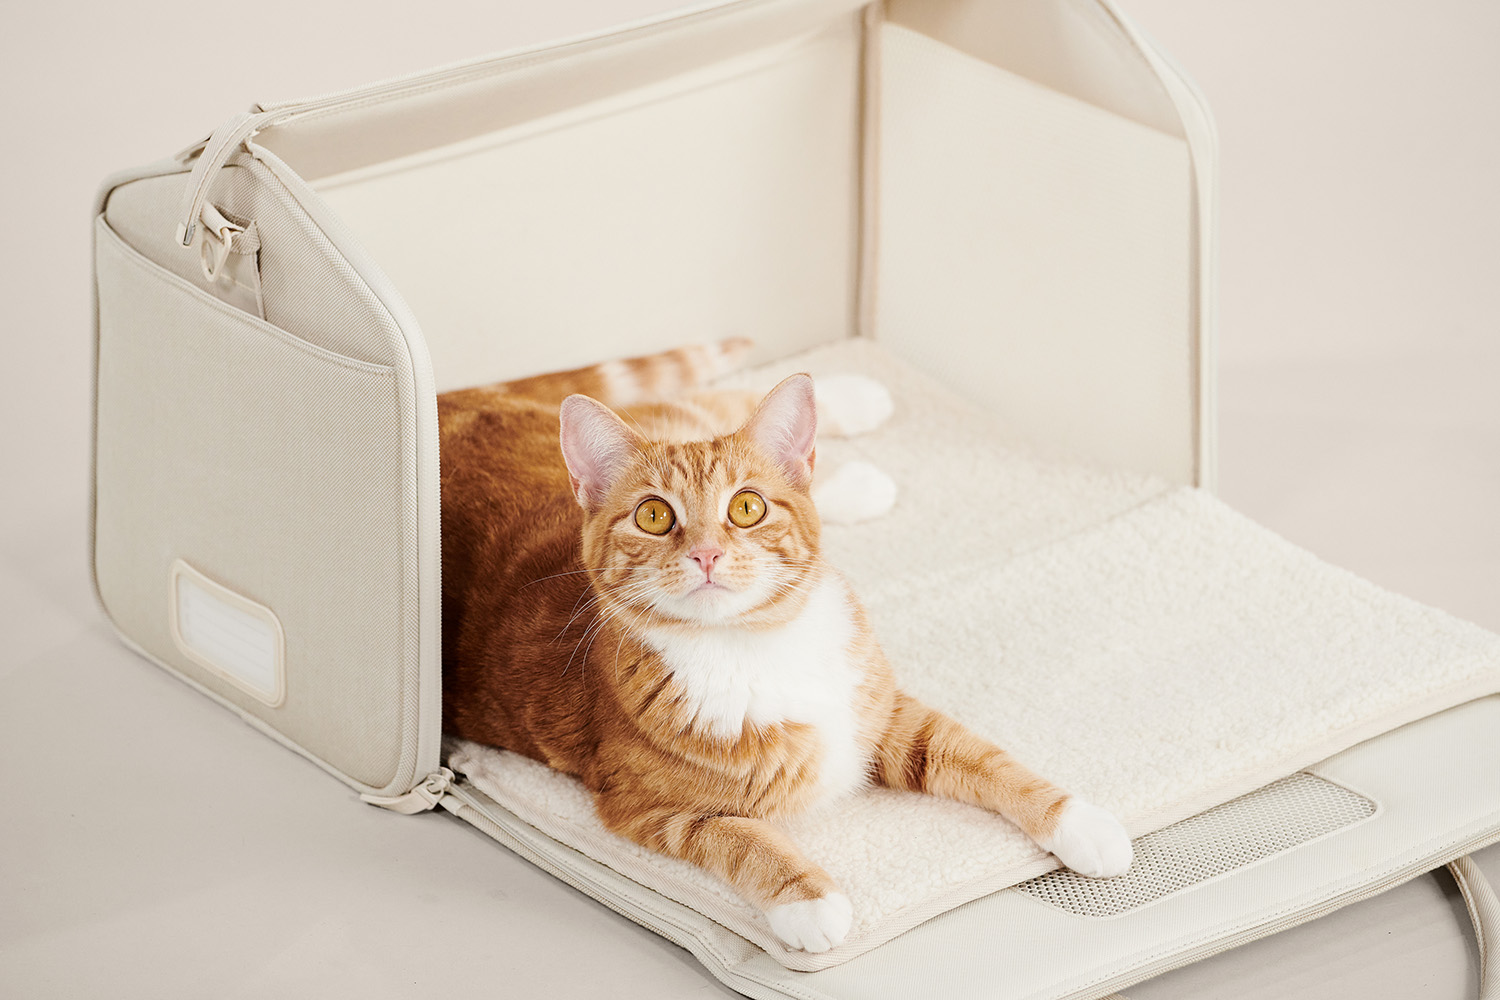 Tuft + Paw launched a new Porto Cat Carrier